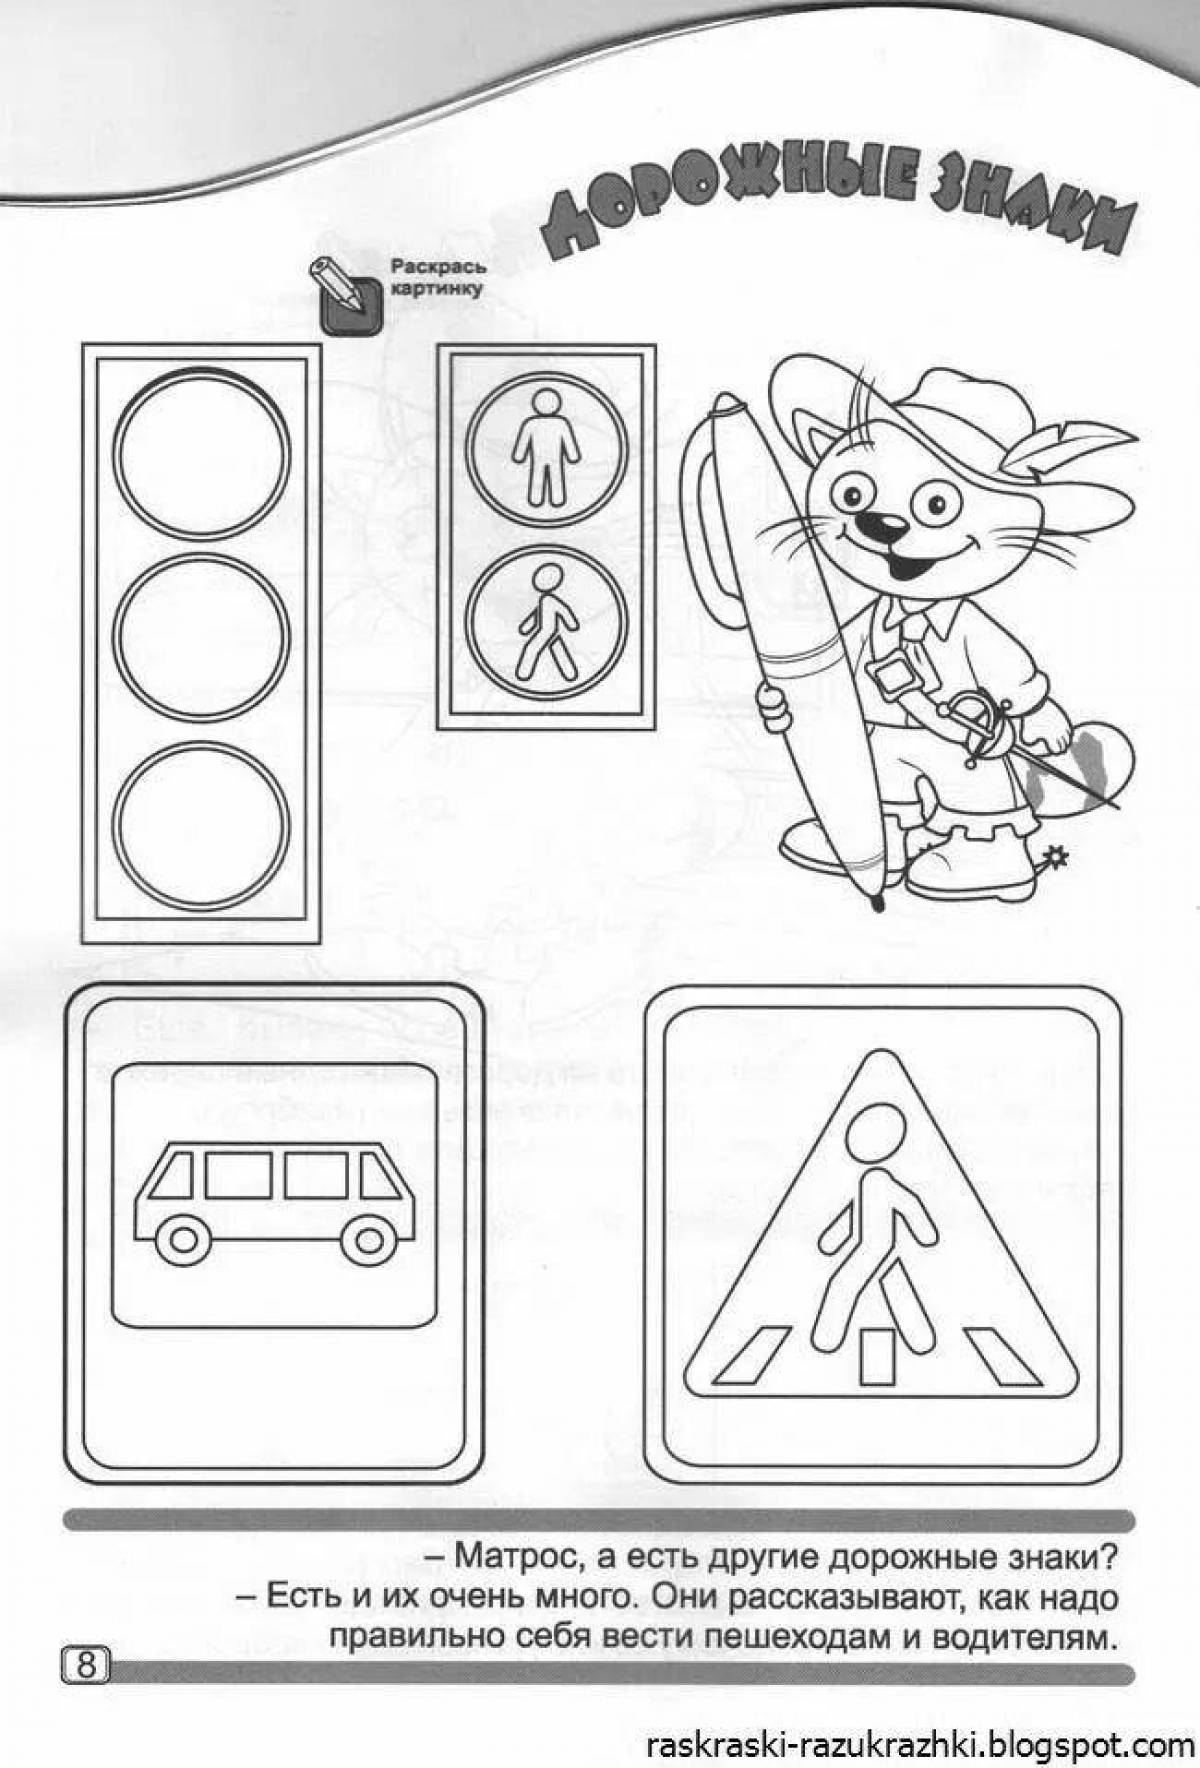 Amazing rules of the road 2nd grade coloring book